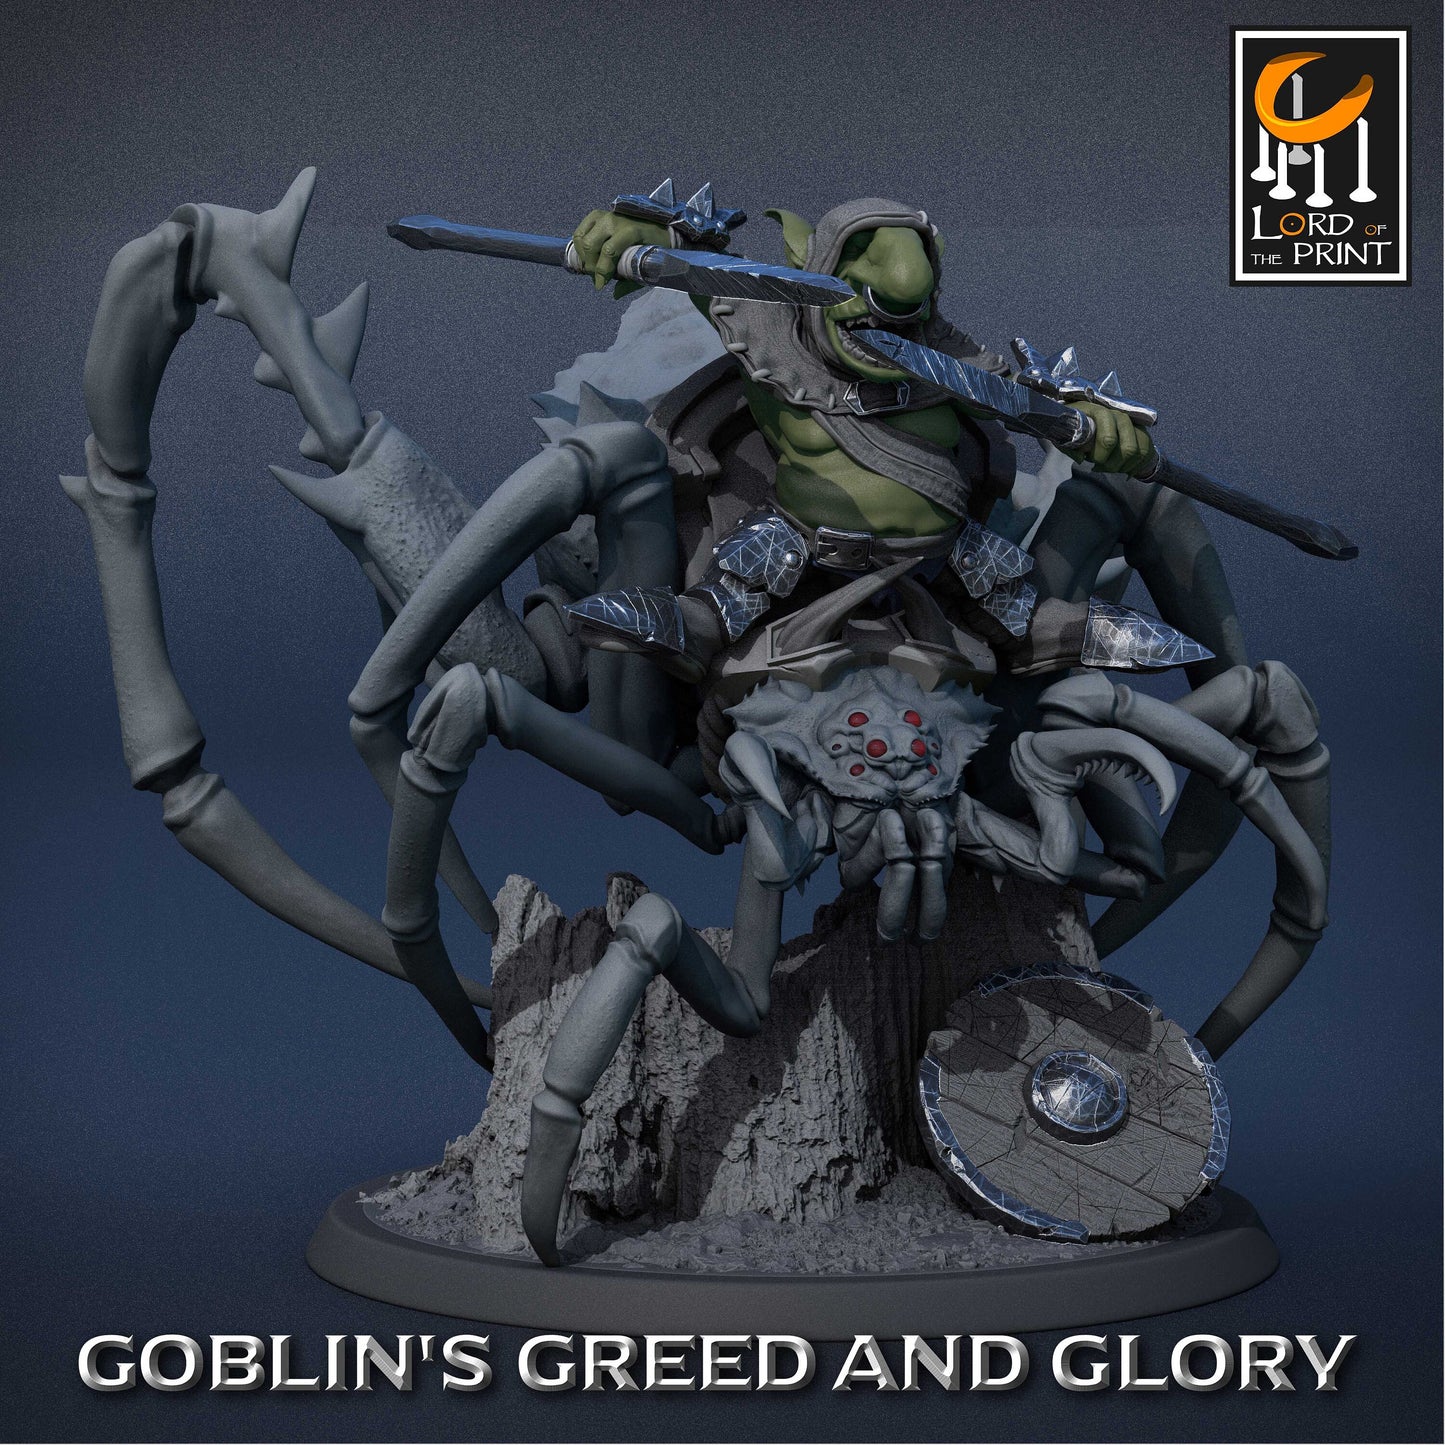 Goblin Spider Riders A | RPG Miniature for Dungeons and Dragons|Pathfinder|Tabletop Wargaming | Goblin Miniature | Lord of the Print